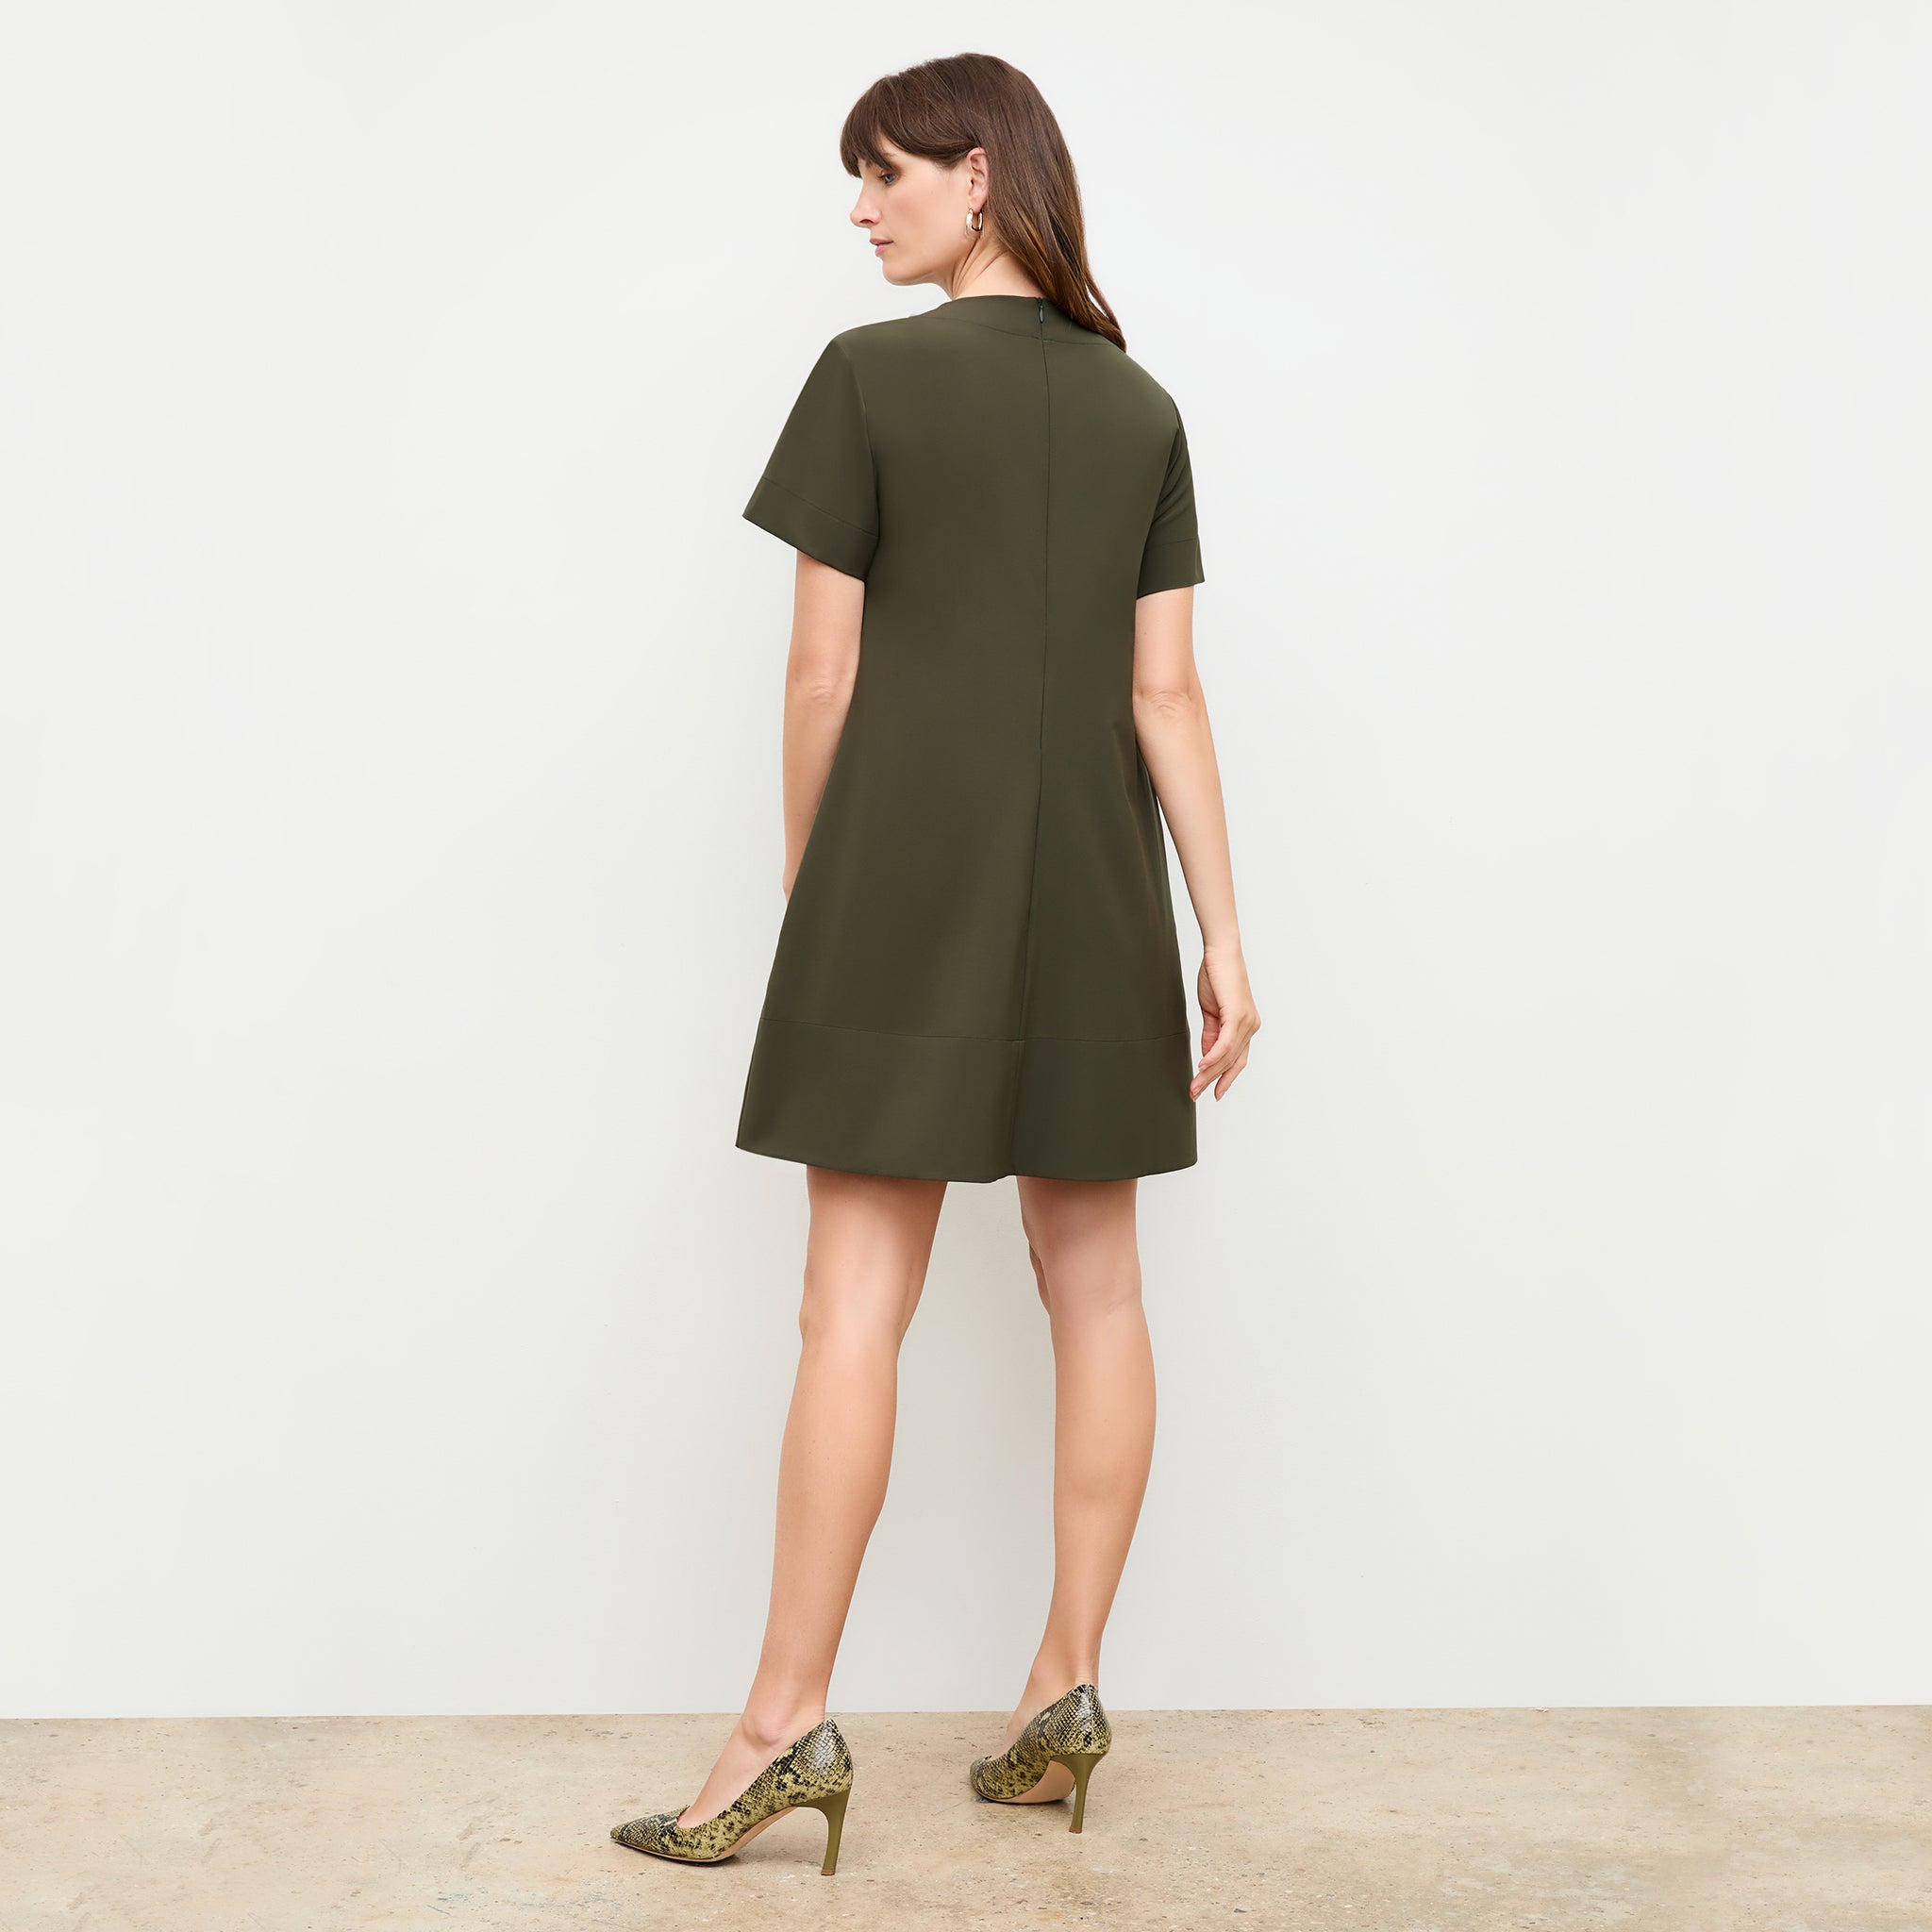 back image of a woman wearing the Corrie Dress in Olive